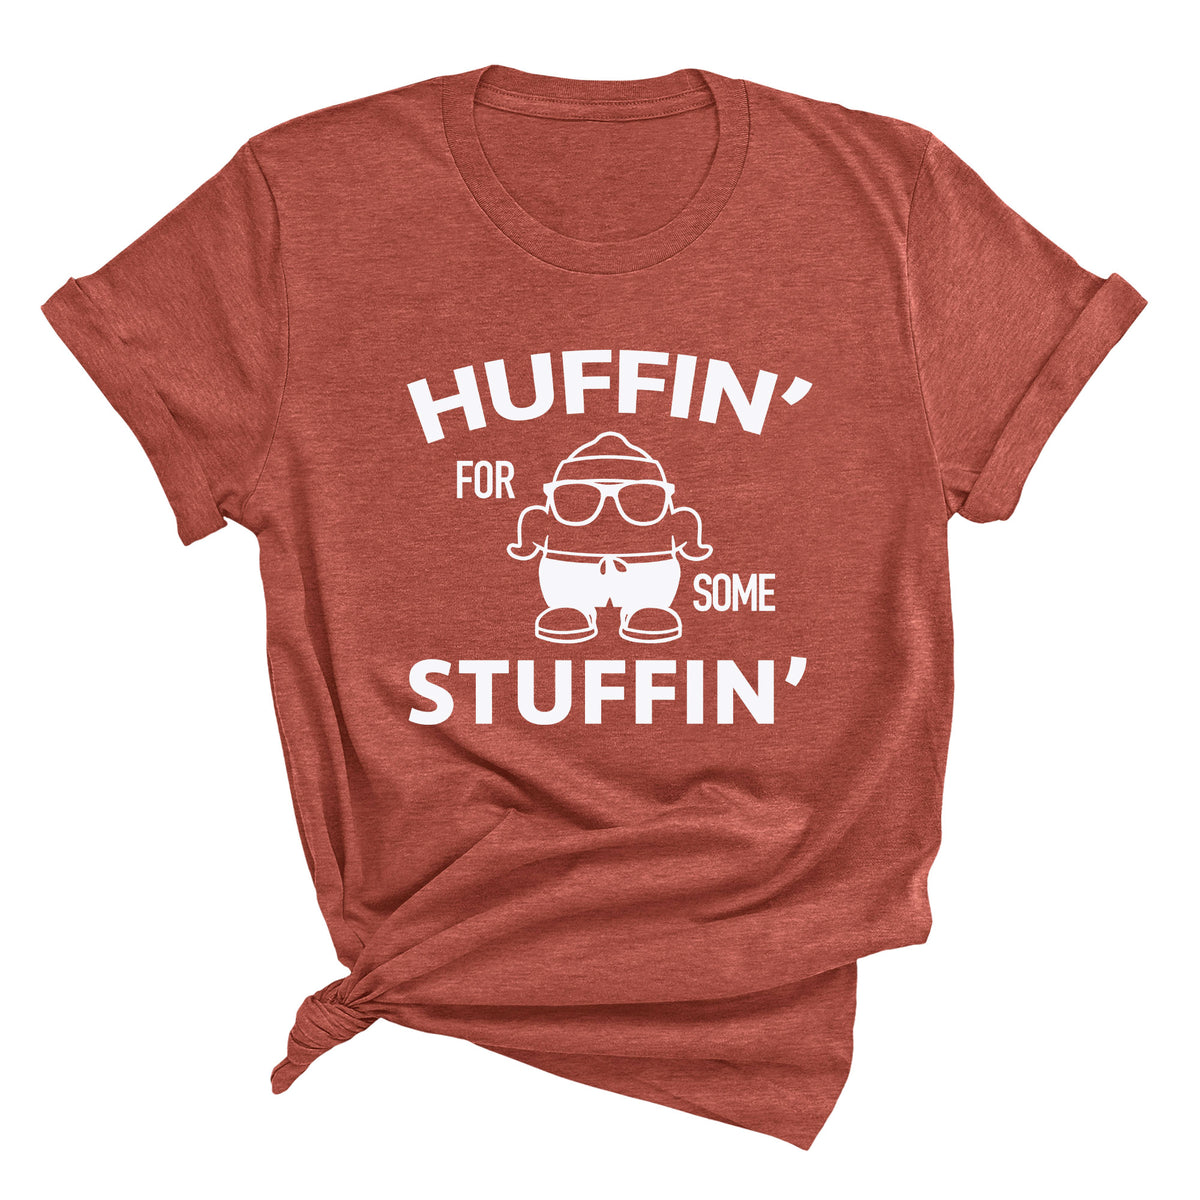 Huffin' for Some Stuffin' Unisex T-Shirt